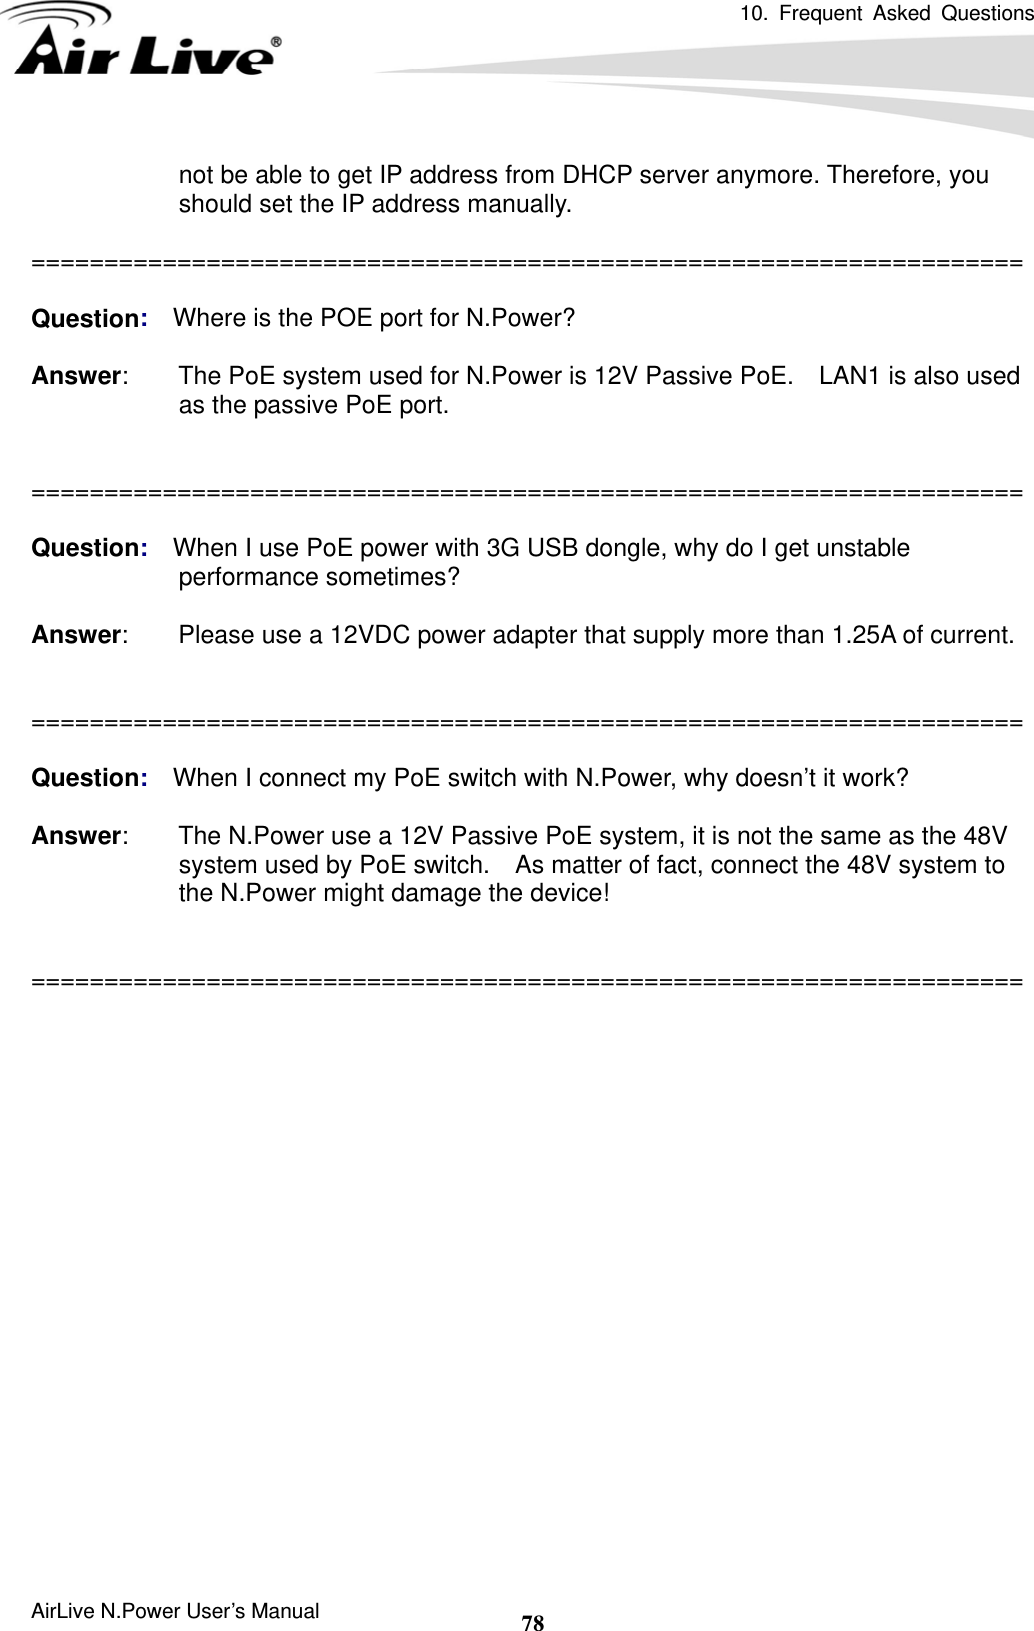 10. Frequent Asked Questions     AirLive N.Power User’s Manual  78not be able to get IP address from DHCP server anymore. Therefore, you should set the IP address manually.  ====================================================================  Question:  Where is the POE port for N.Power?  Answer:        The PoE system used for N.Power is 12V Passive PoE.    LAN1 is also used as the passive PoE port.   ====================================================================  Question:  When I use PoE power with 3G USB dongle, why do I get unstable performance sometimes?  Answer:        Please use a 12VDC power adapter that supply more than 1.25A of current.   ====================================================================  Question:  When I connect my PoE switch with N.Power, why doesn’t it work?  Answer:        The N.Power use a 12V Passive PoE system, it is not the same as the 48V system used by PoE switch.    As matter of fact, connect the 48V system to the N.Power might damage the device!   ====================================================================  